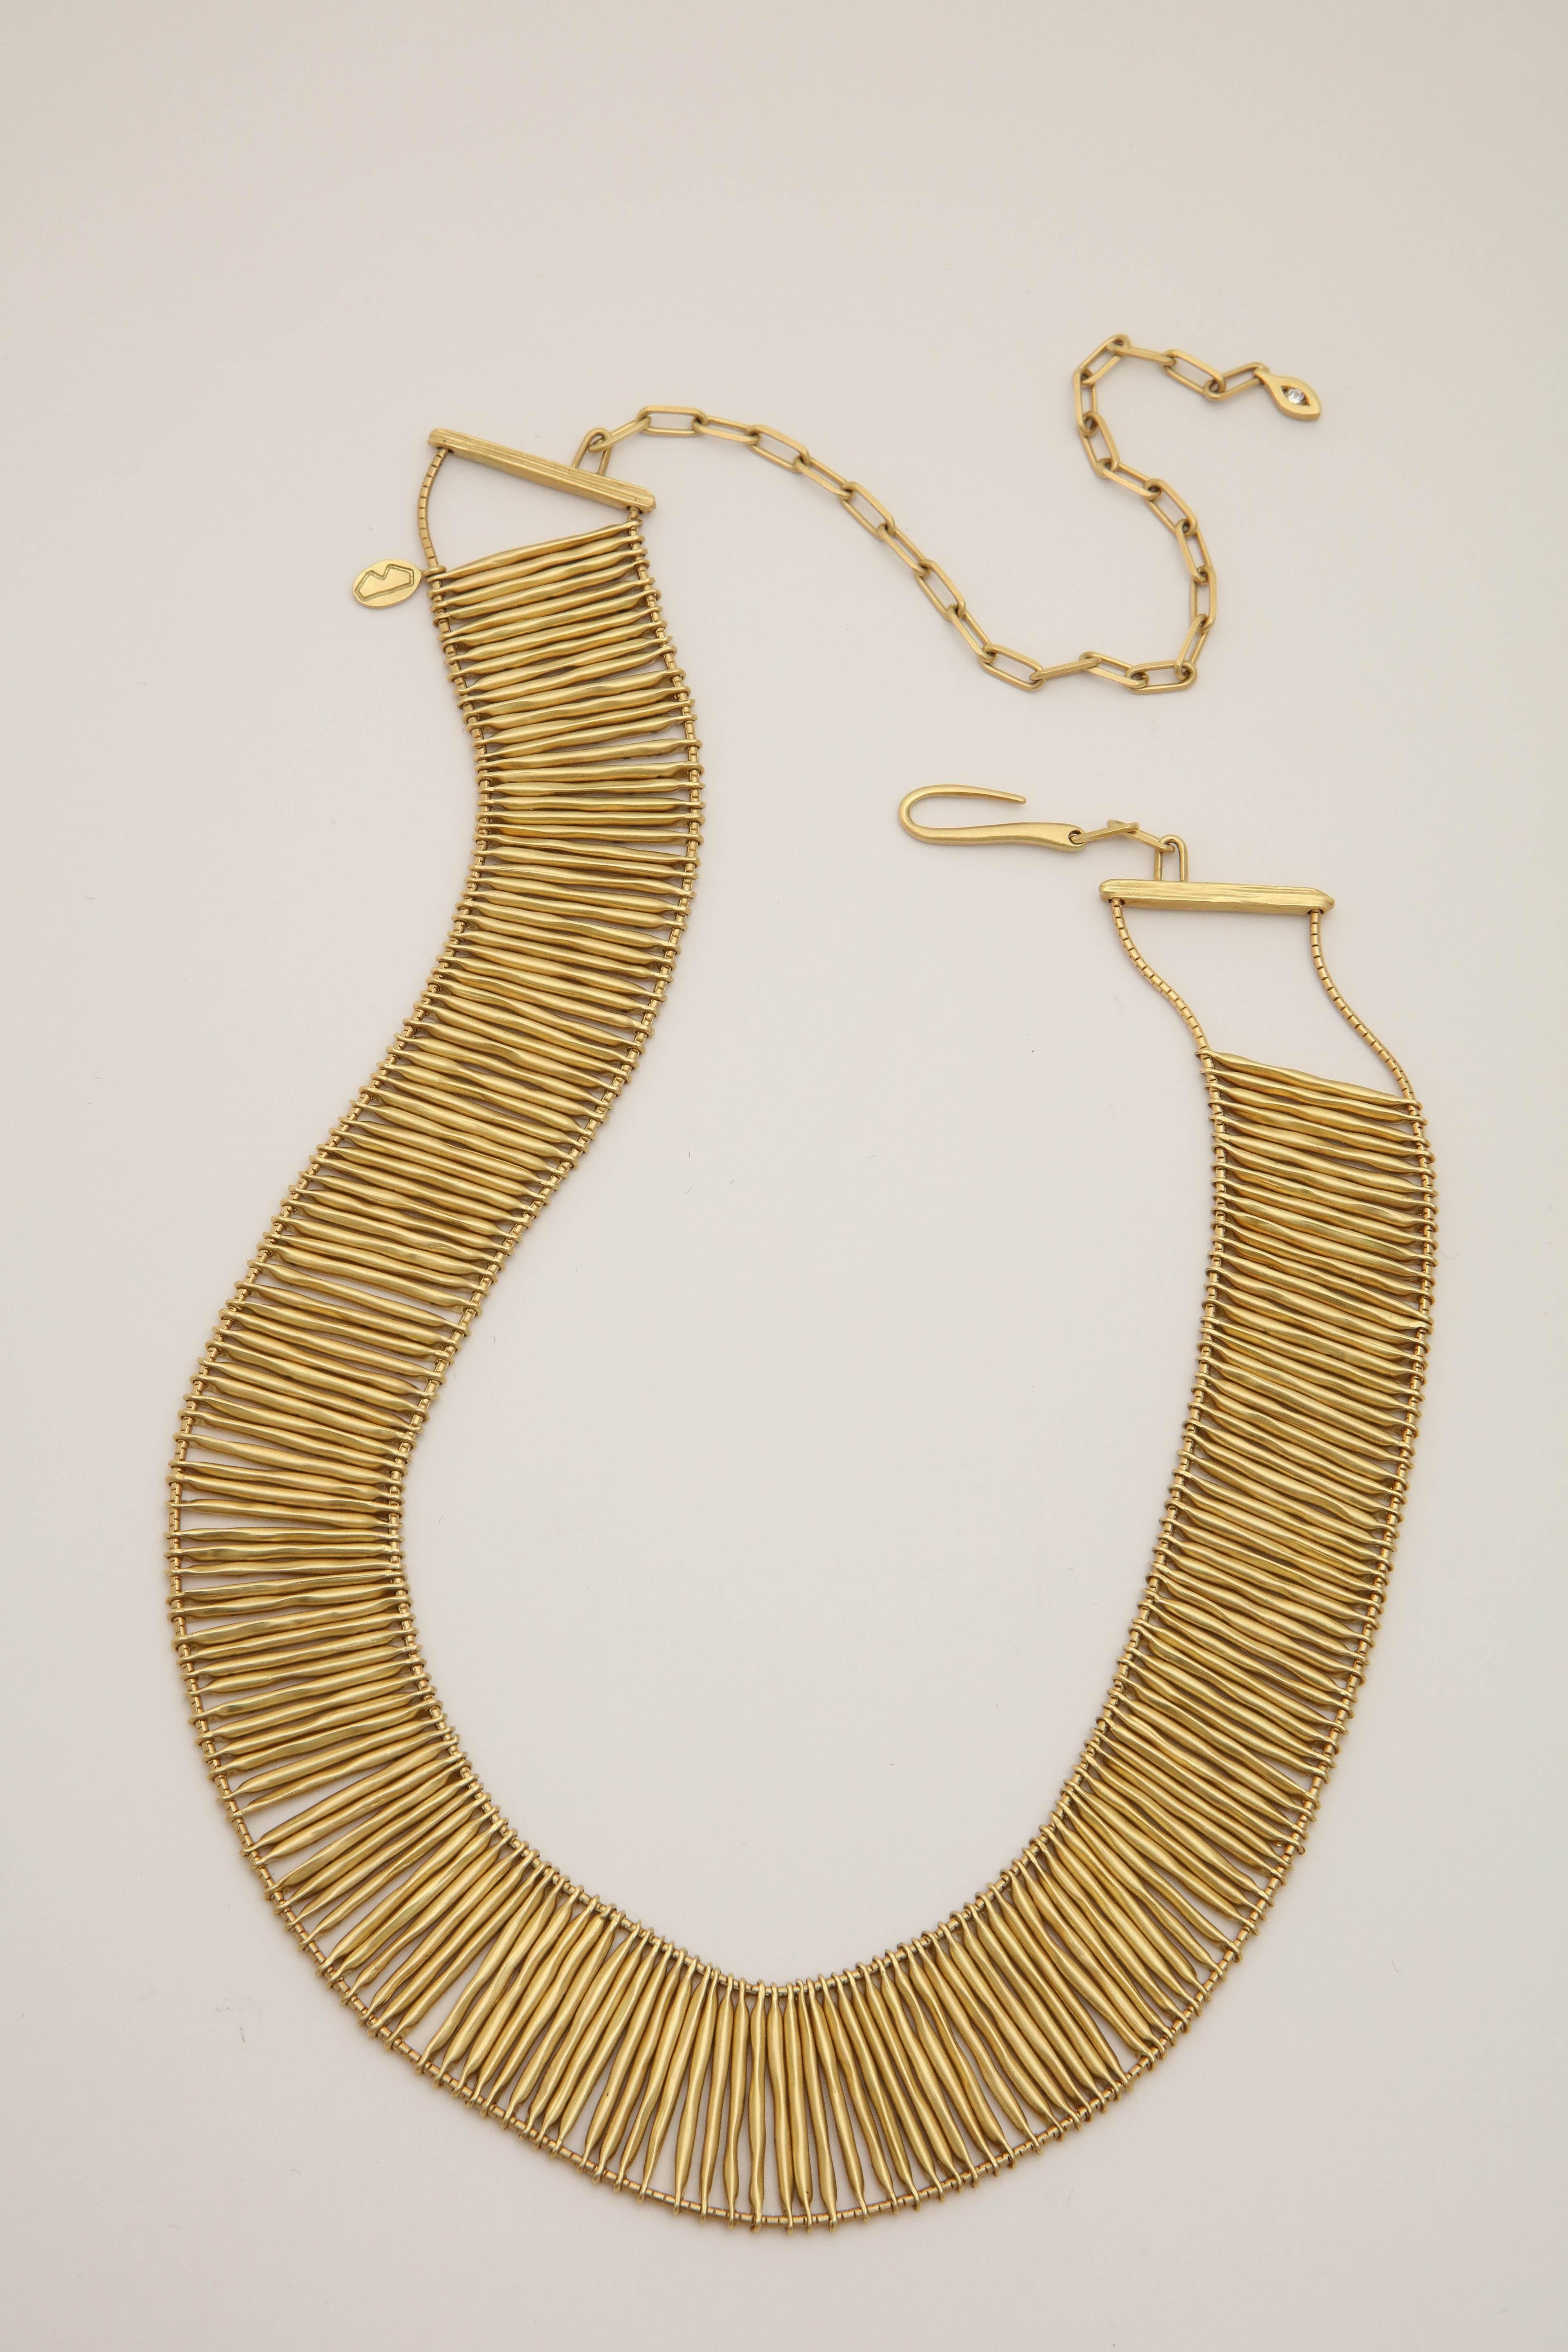 1970s H.Stern Flexible and Sliding Gold Stick Pieces Escalator Necklace 1